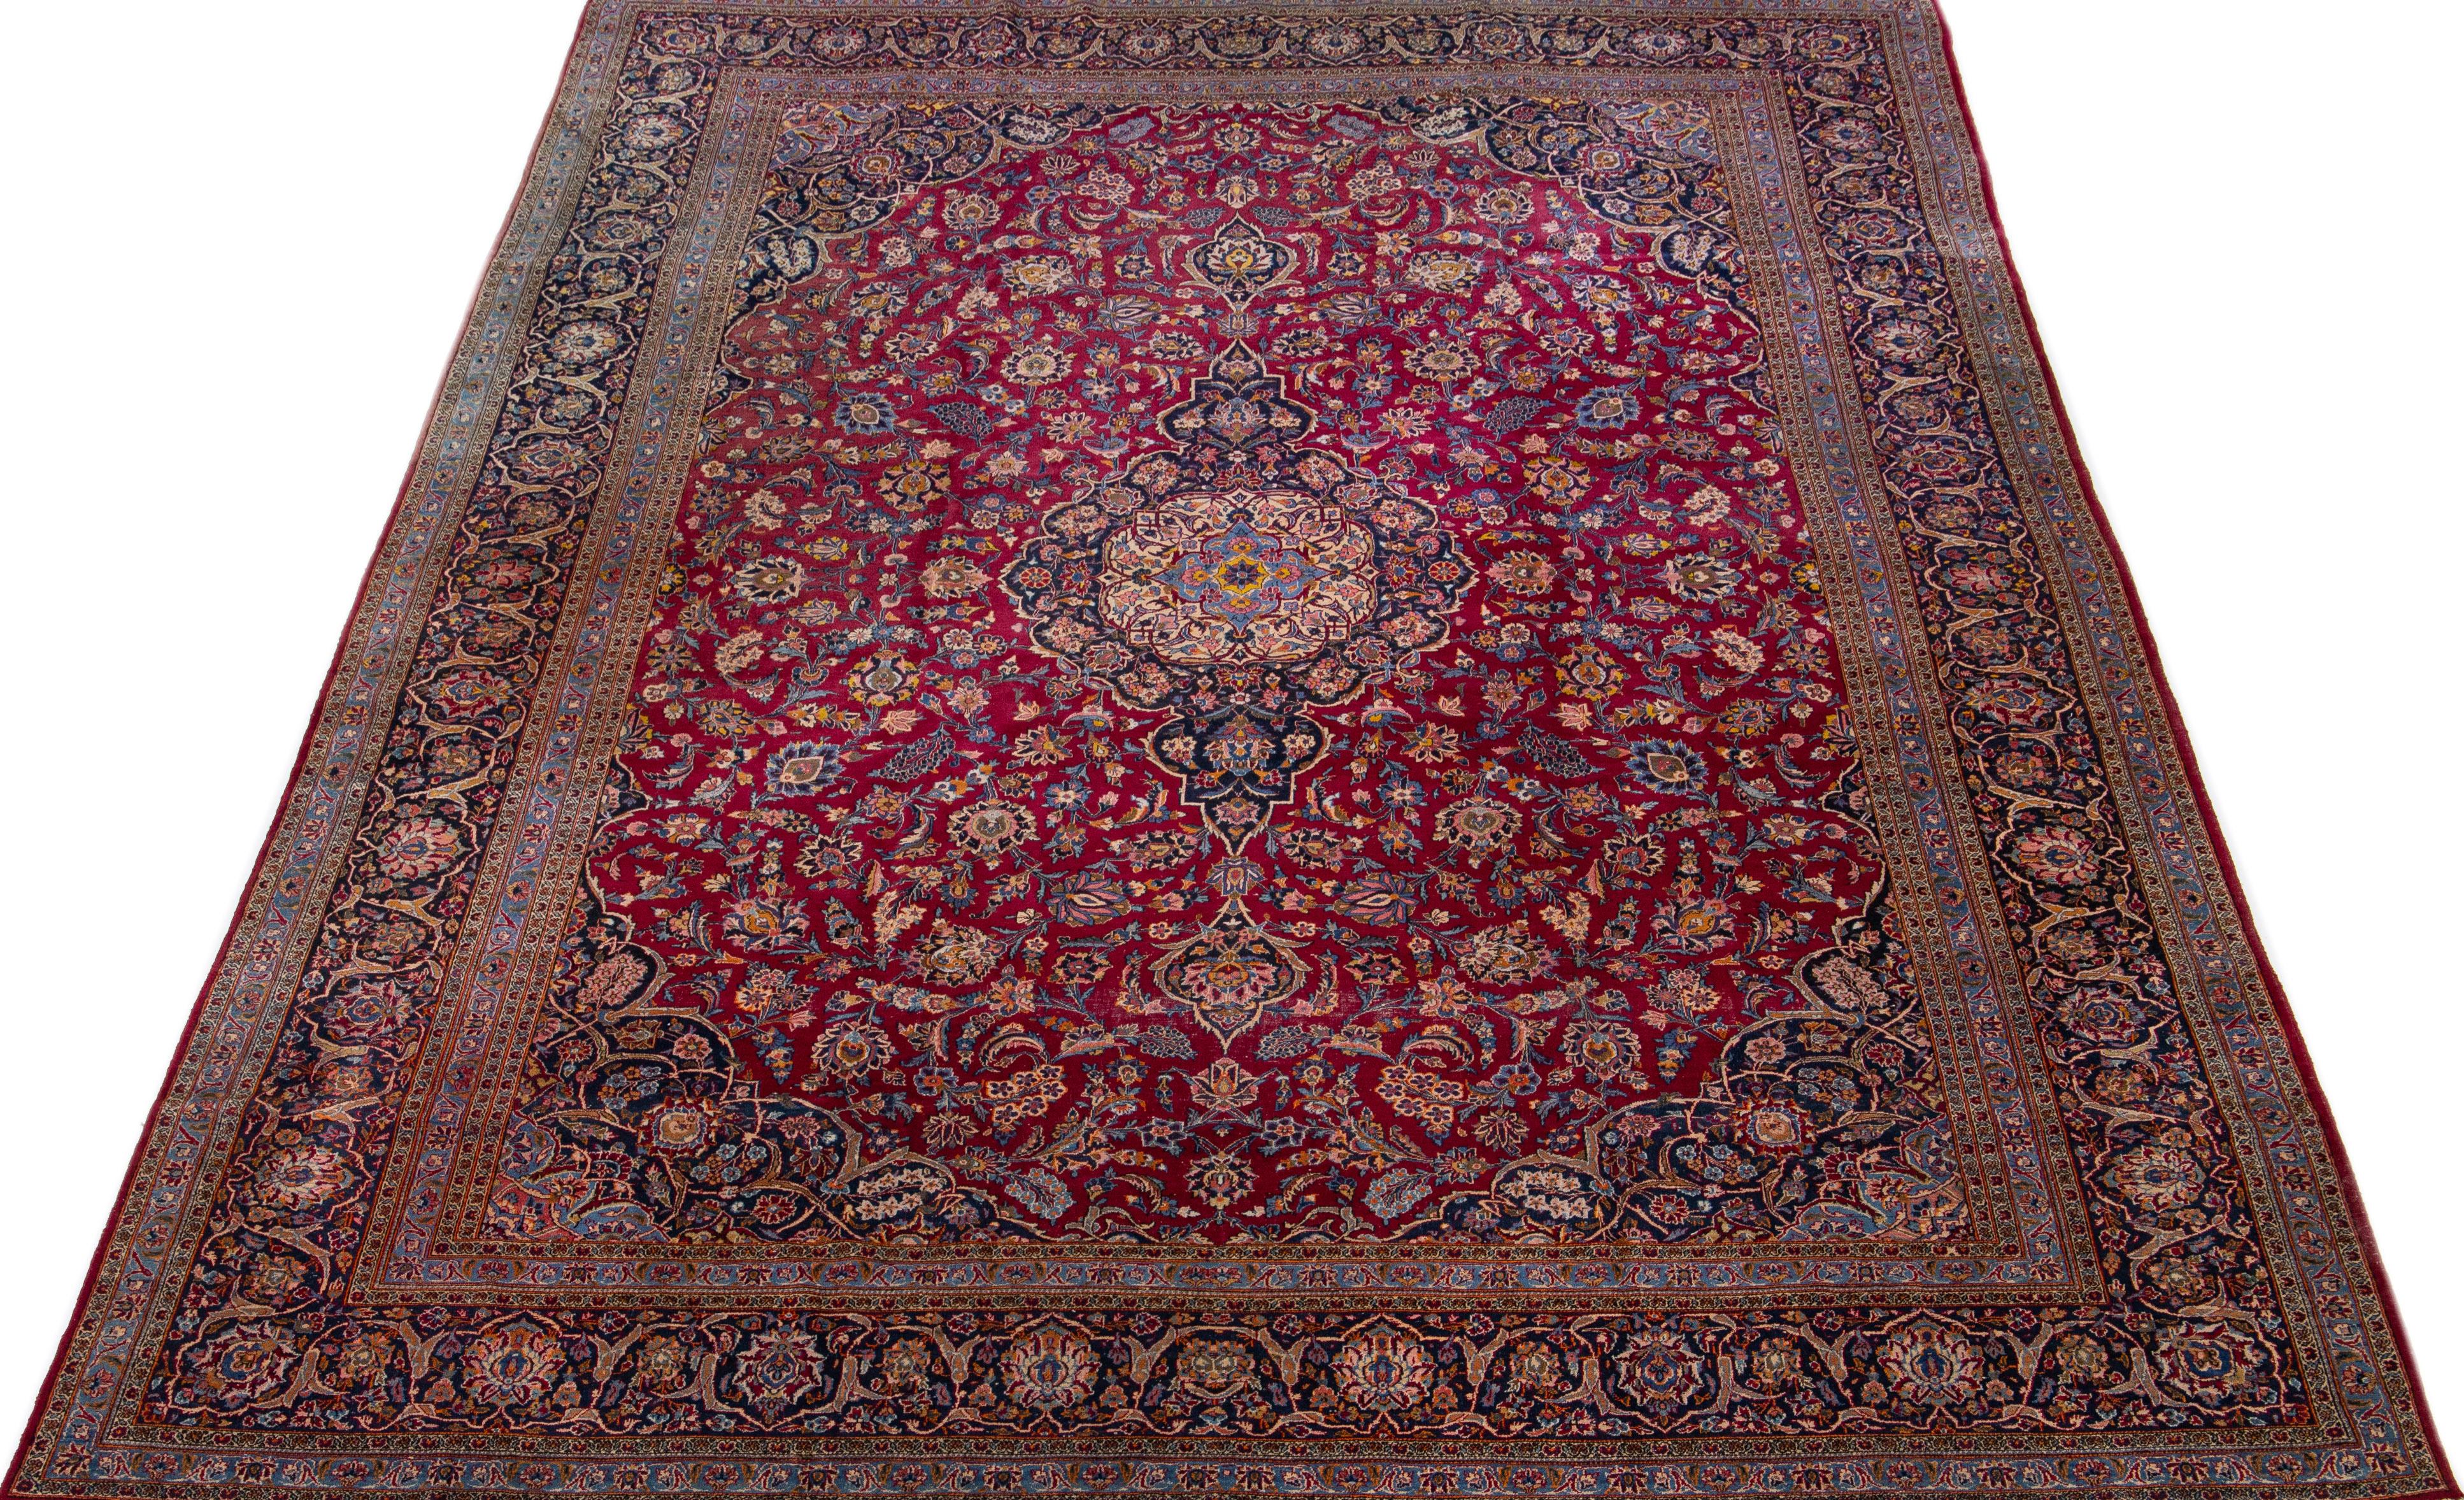 This antique Kashan wool rug boasts an exquisite design, featuring a red color field and a distinguished blue frame adorned with stunning multicolored floral accents. Its oversized dimensions add to the rug's allure, making it a true masterpiece of